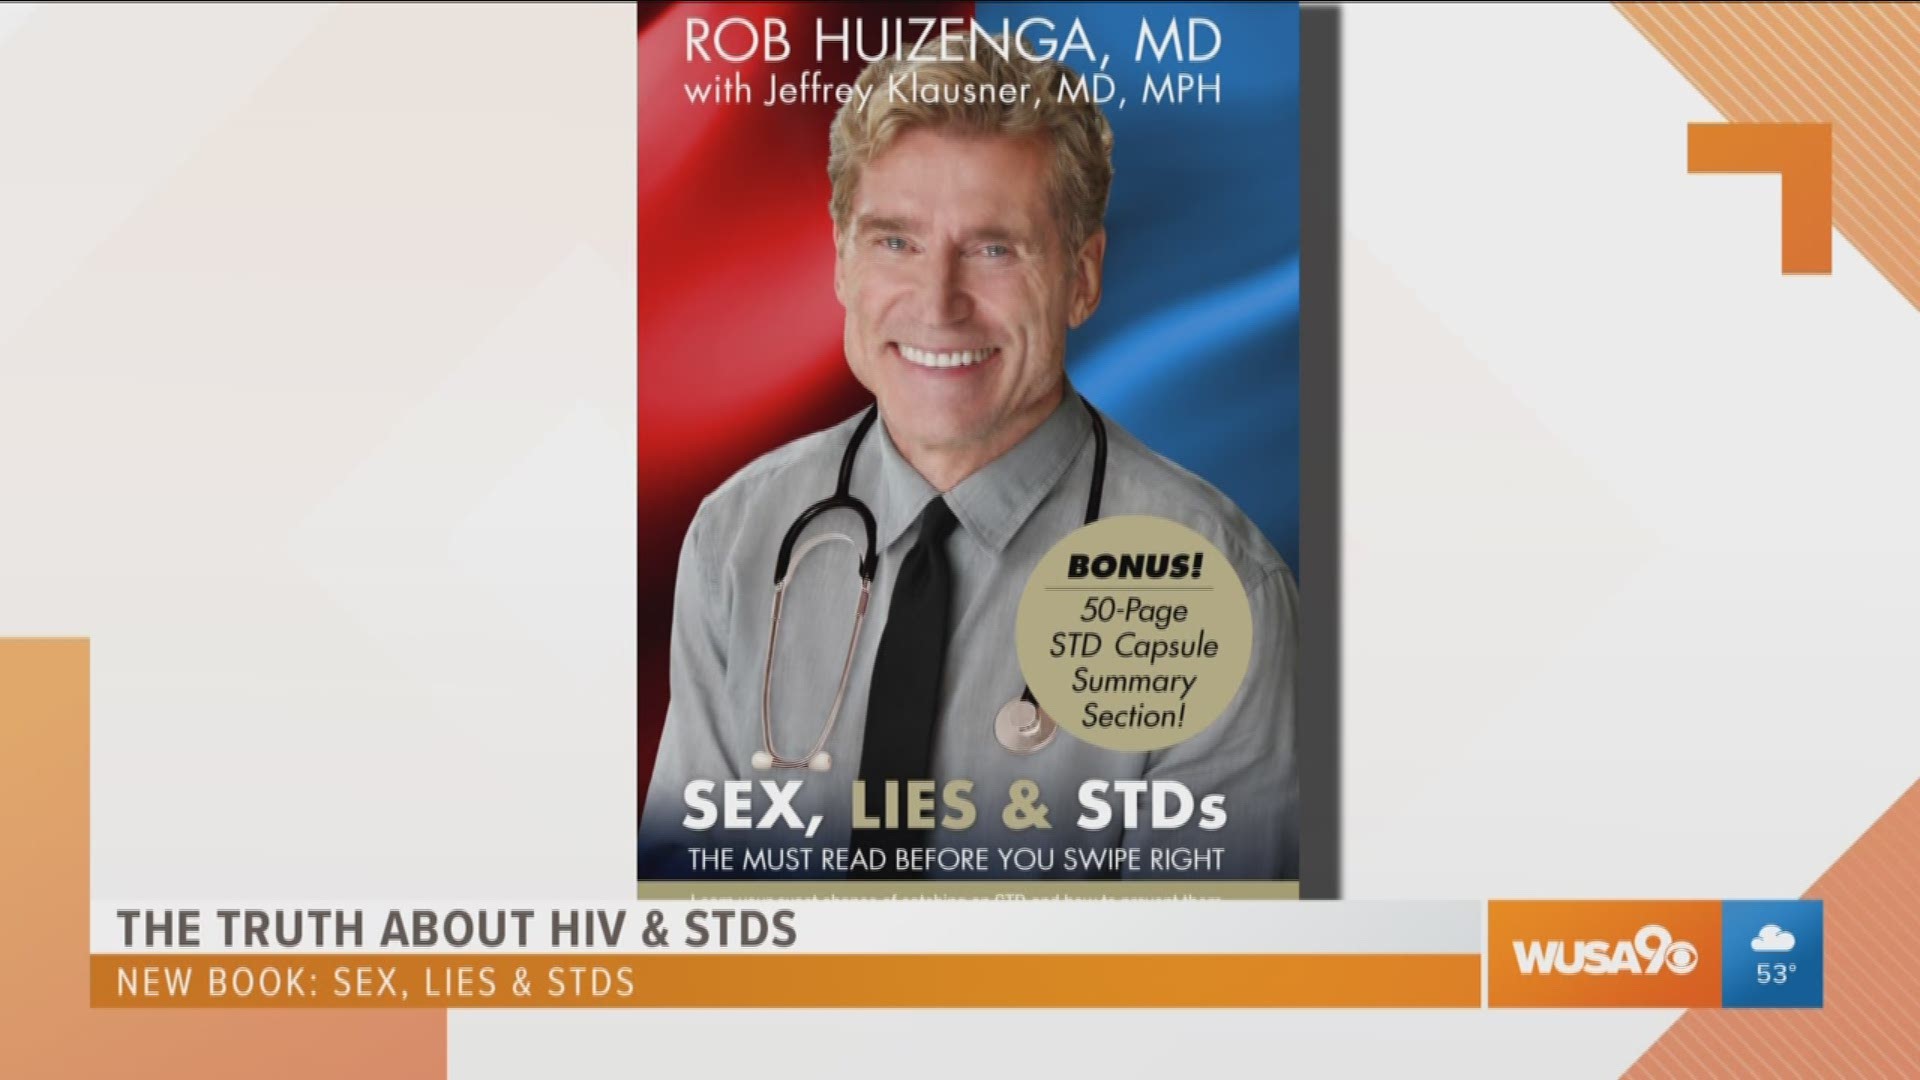 Celebrity physician, Dr. Rob Huizenga speaks about the rising STD and HIV rates. His new book, "Sex, Lies & STDs” is available via Kindle or hardcover on Amazon. https://amzn.to/2VirhPh.